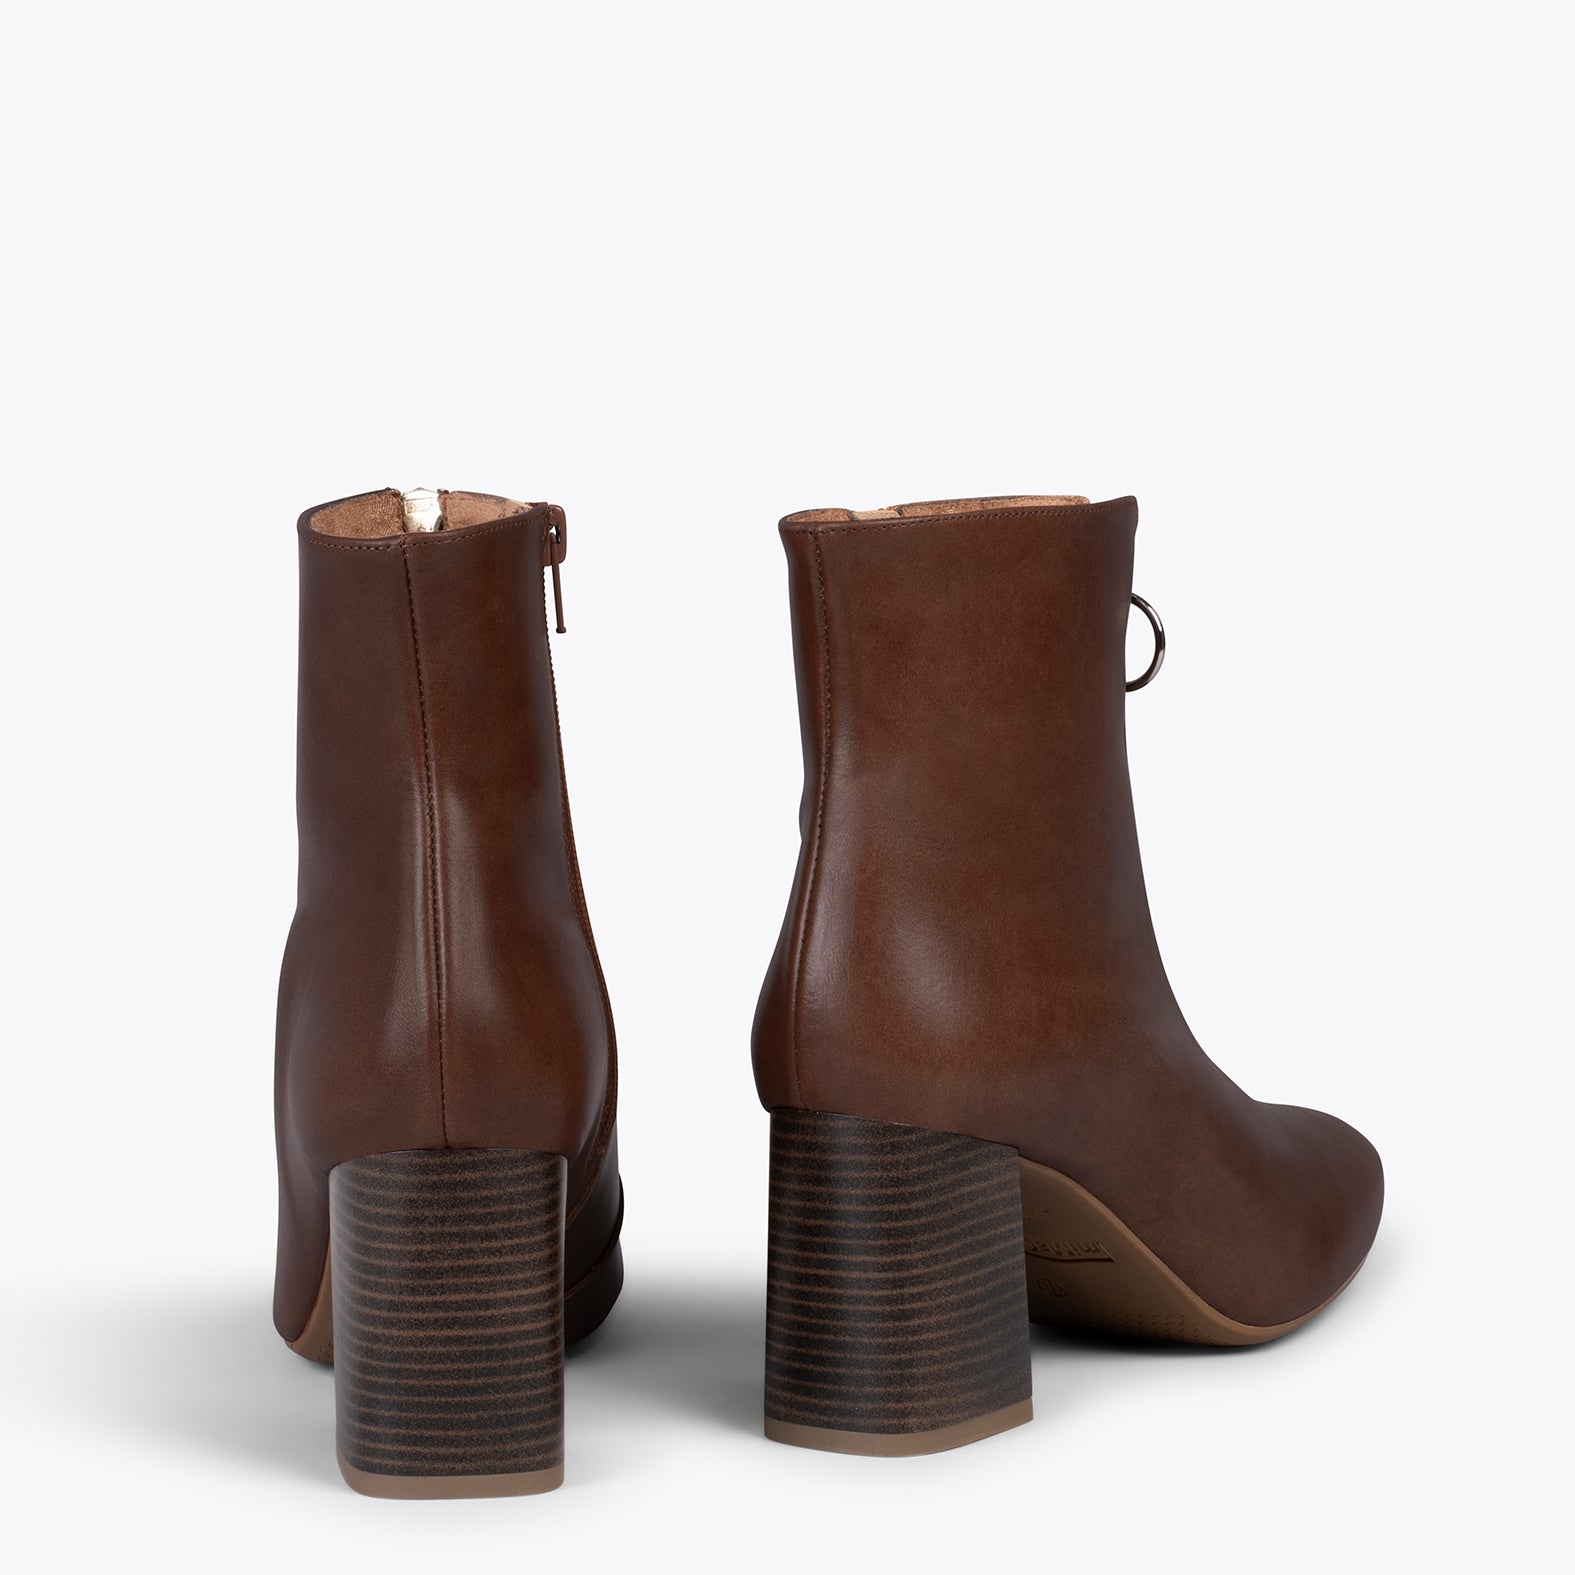 GIRL – BROWN bootie with decorative front zipper